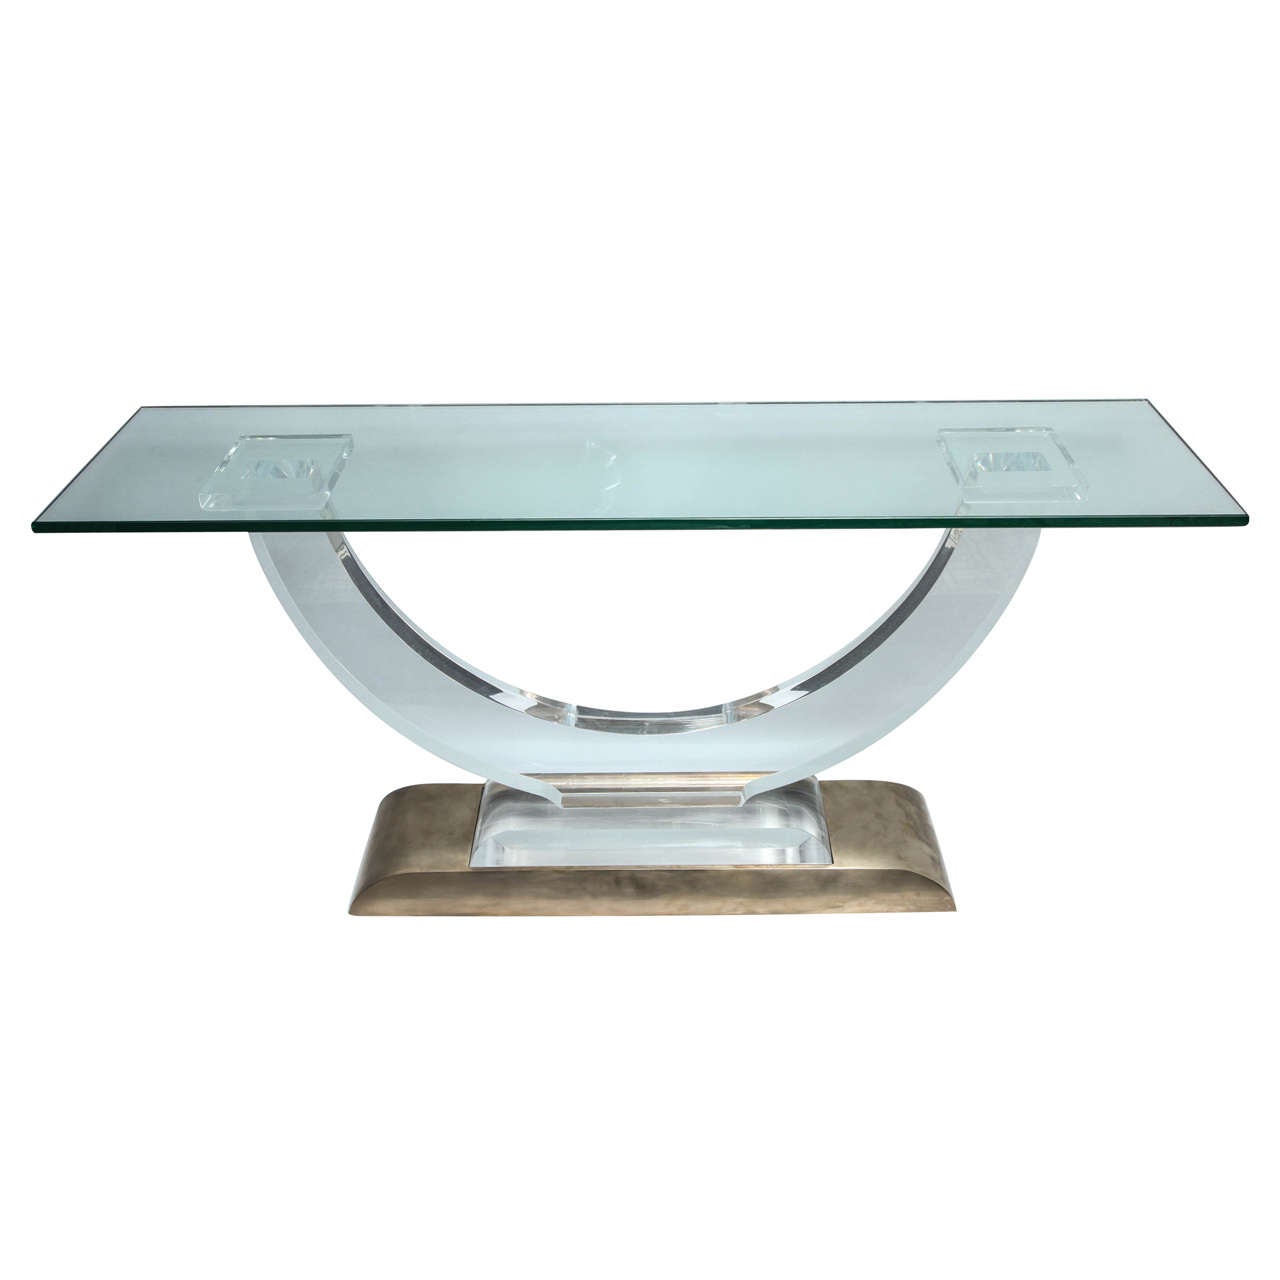 1970s Architectural Modernist Glass Top Console in Lucite and Bronze